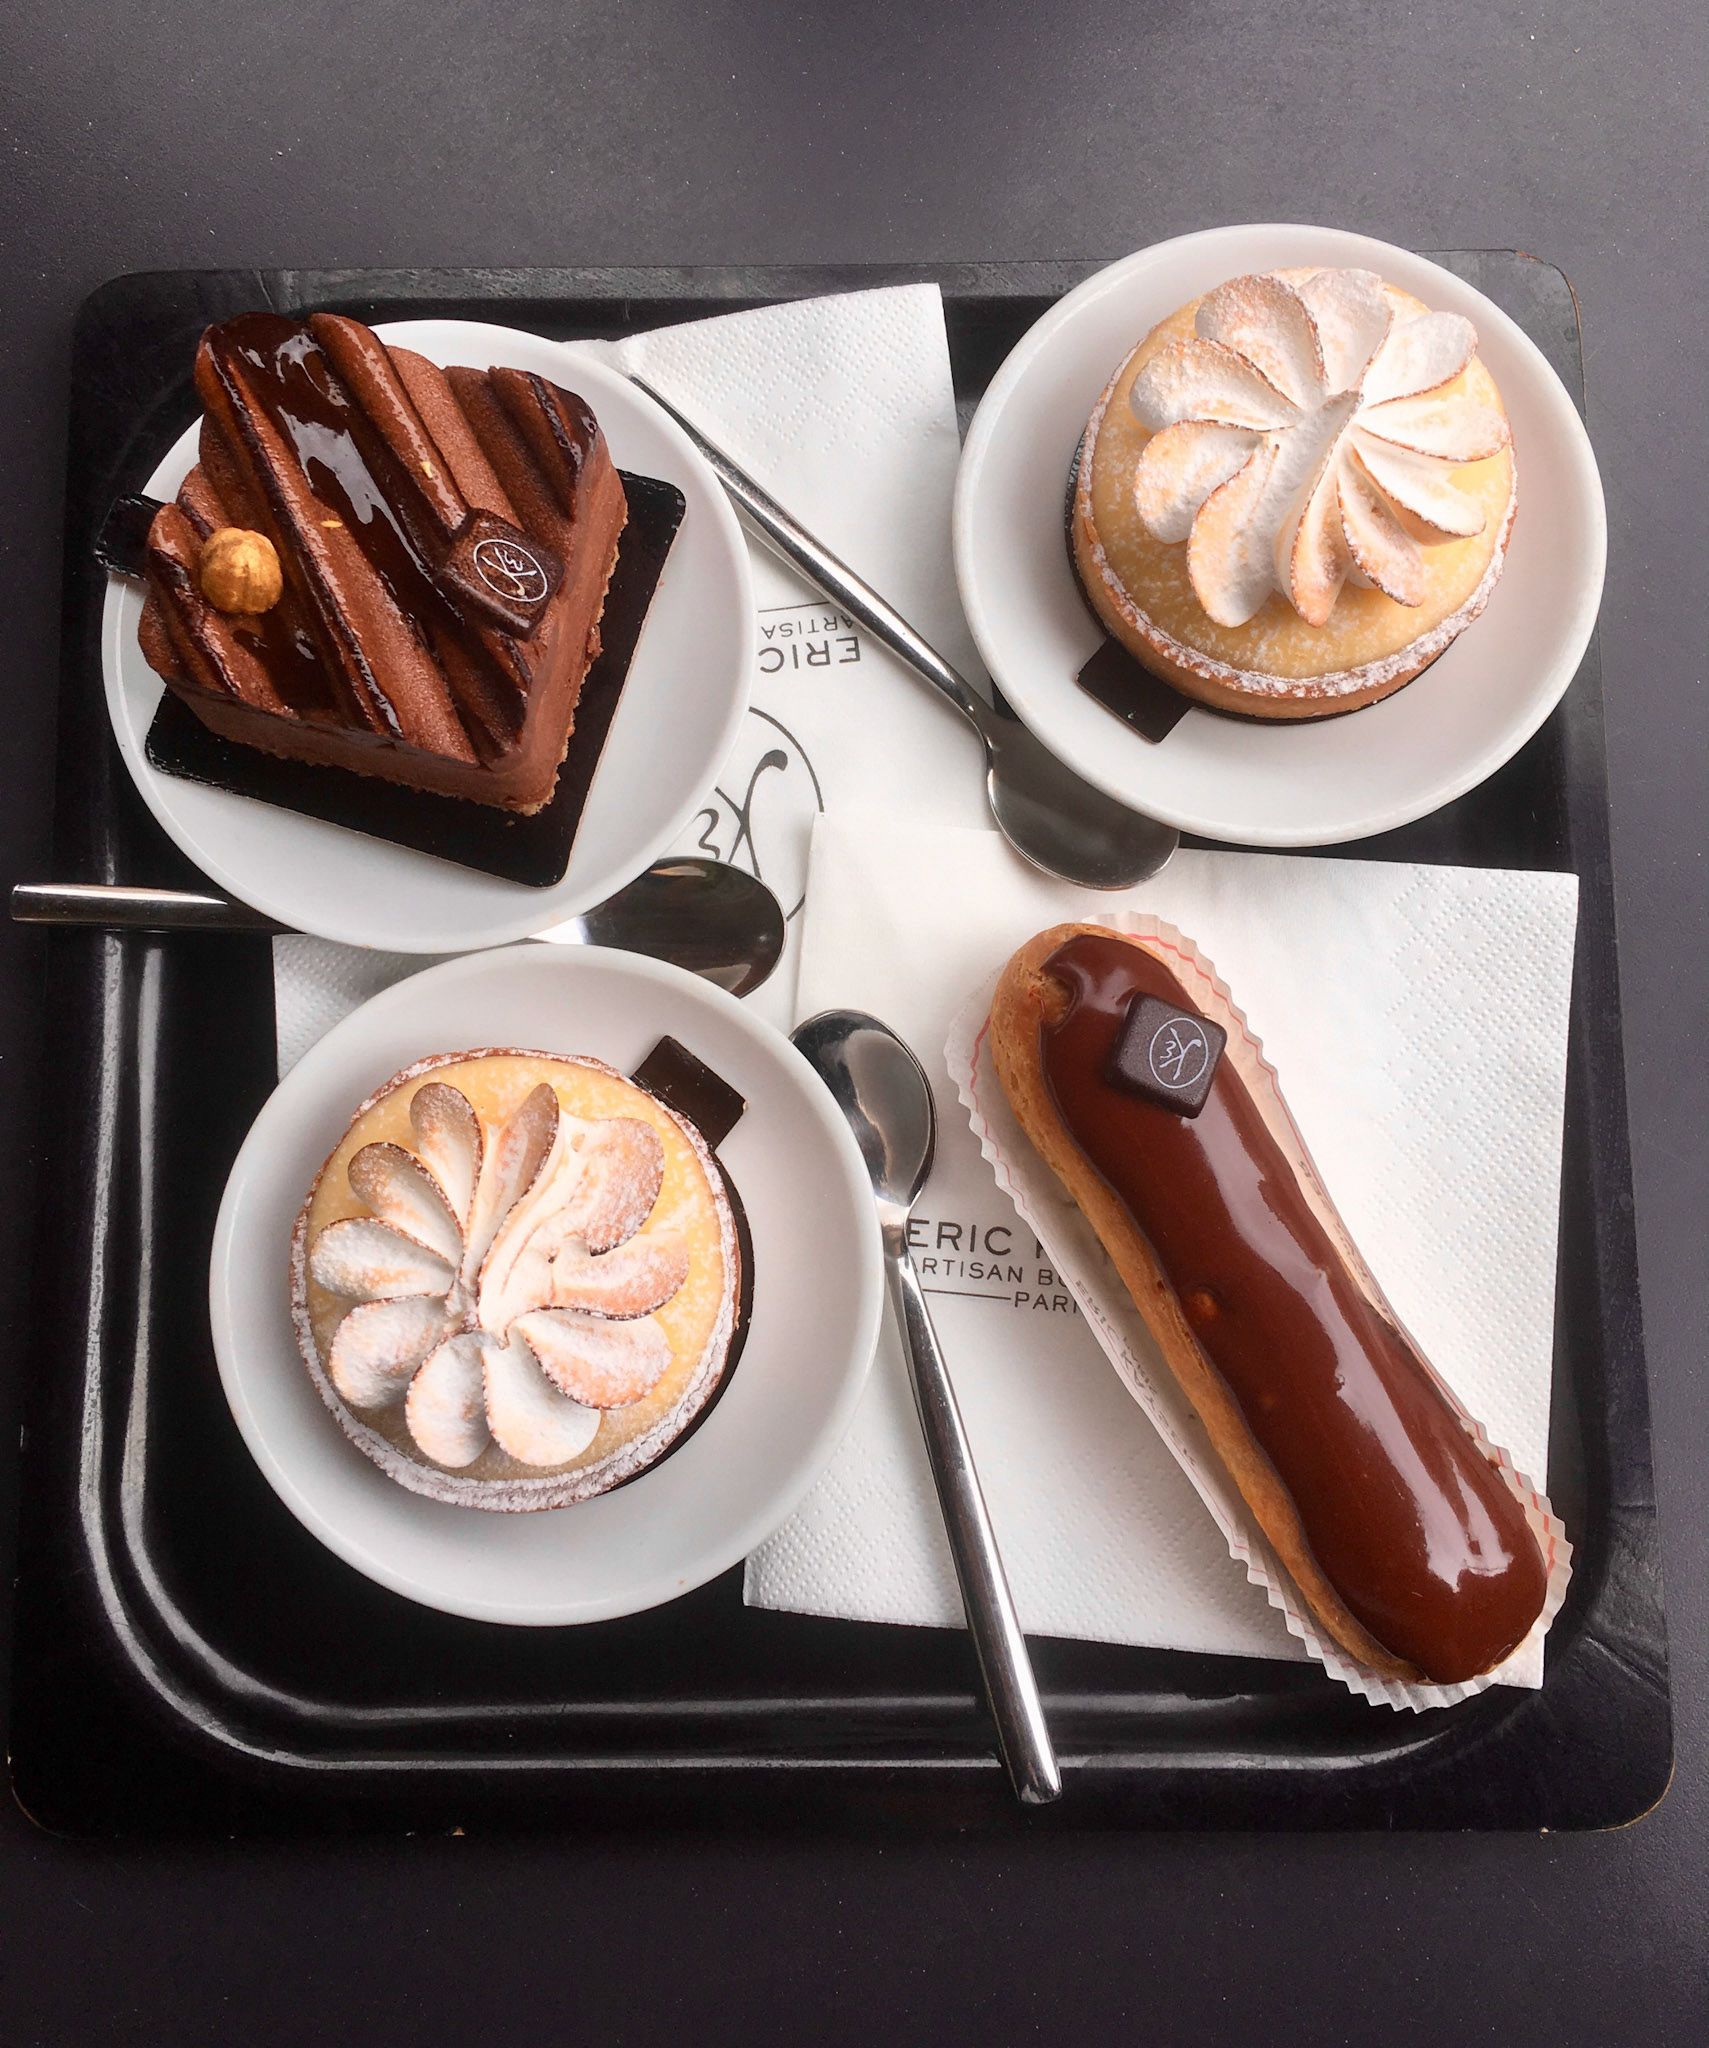 Pastries from Eric Kayser